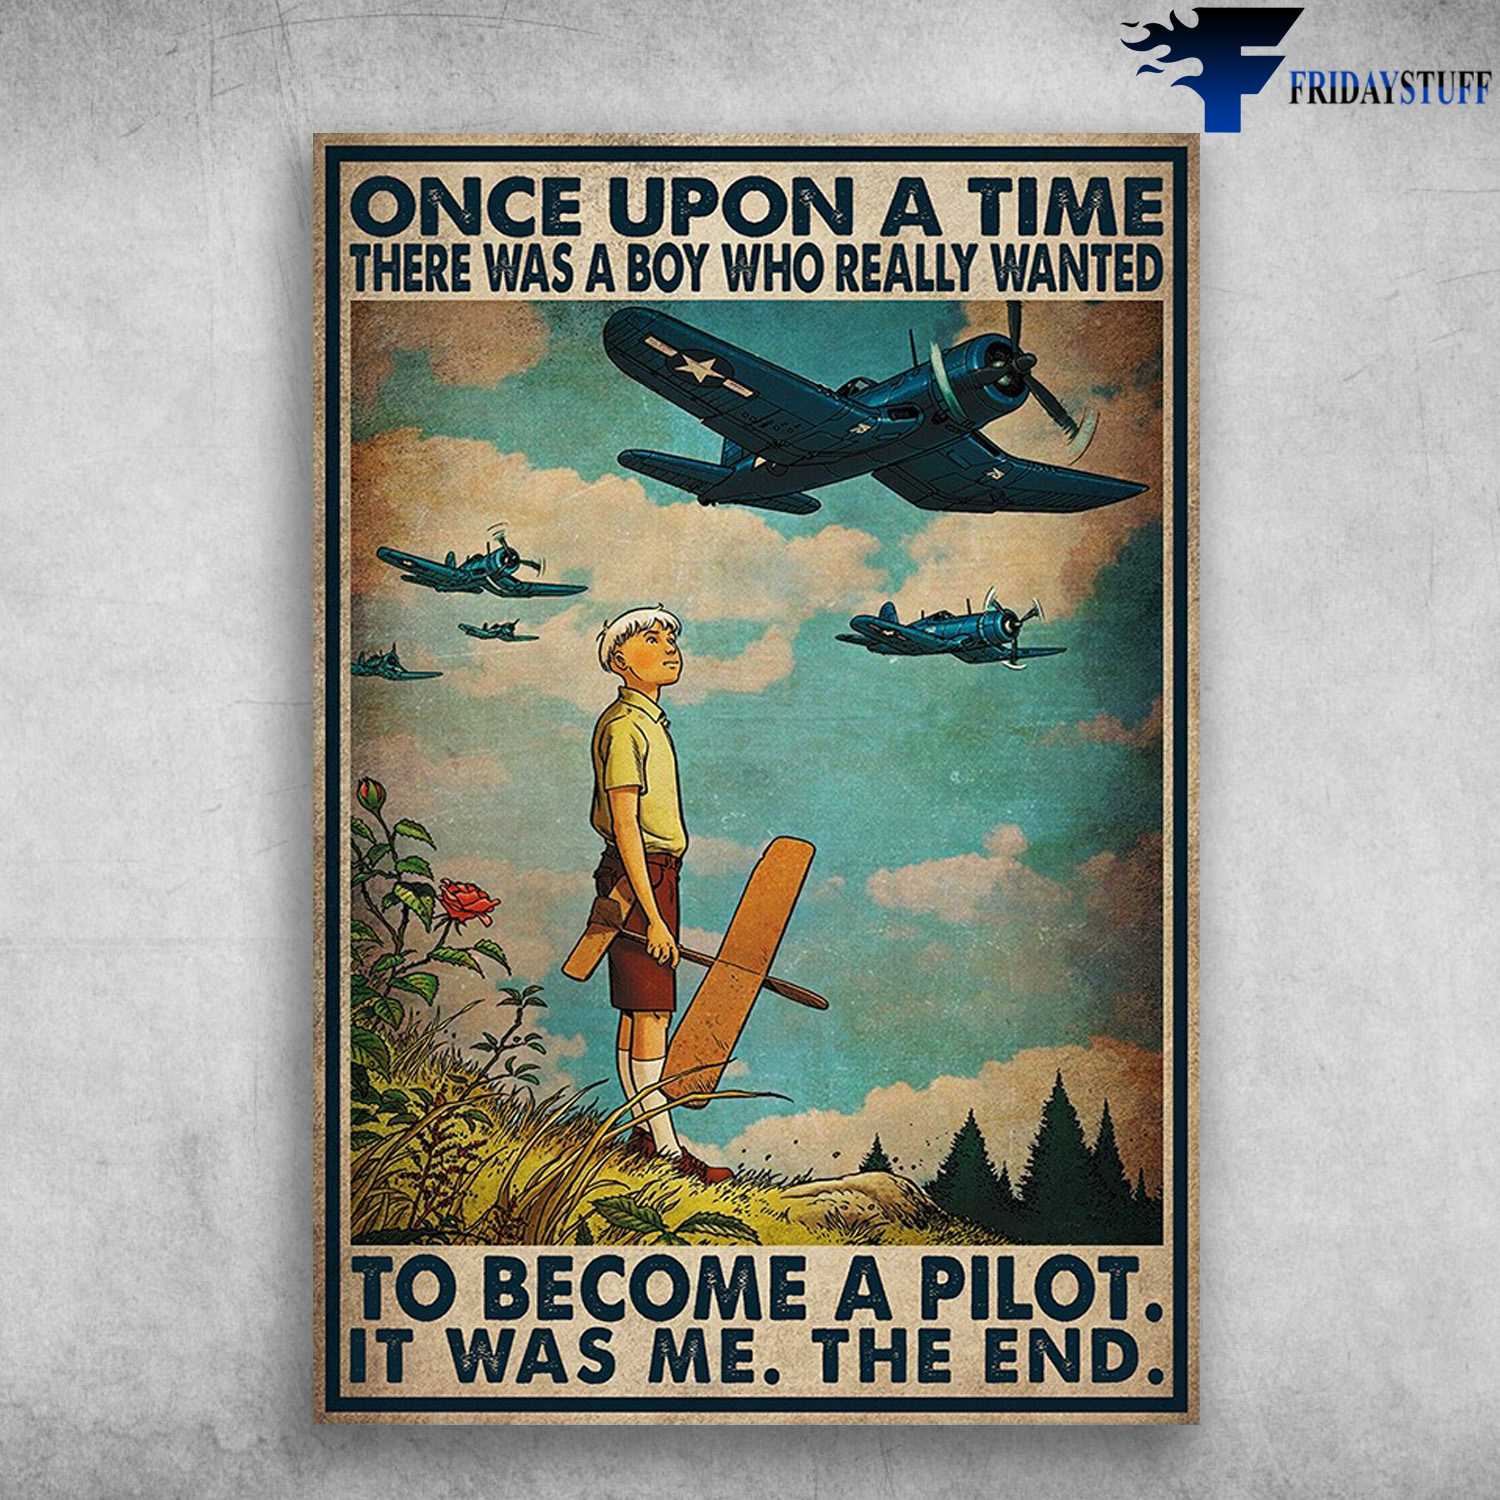 Young Pilot, Aircraft Poster - Once Upon A Time, There Was A Boy, Who Really Wanted, To Becom A Pilot, It Was Me, The End